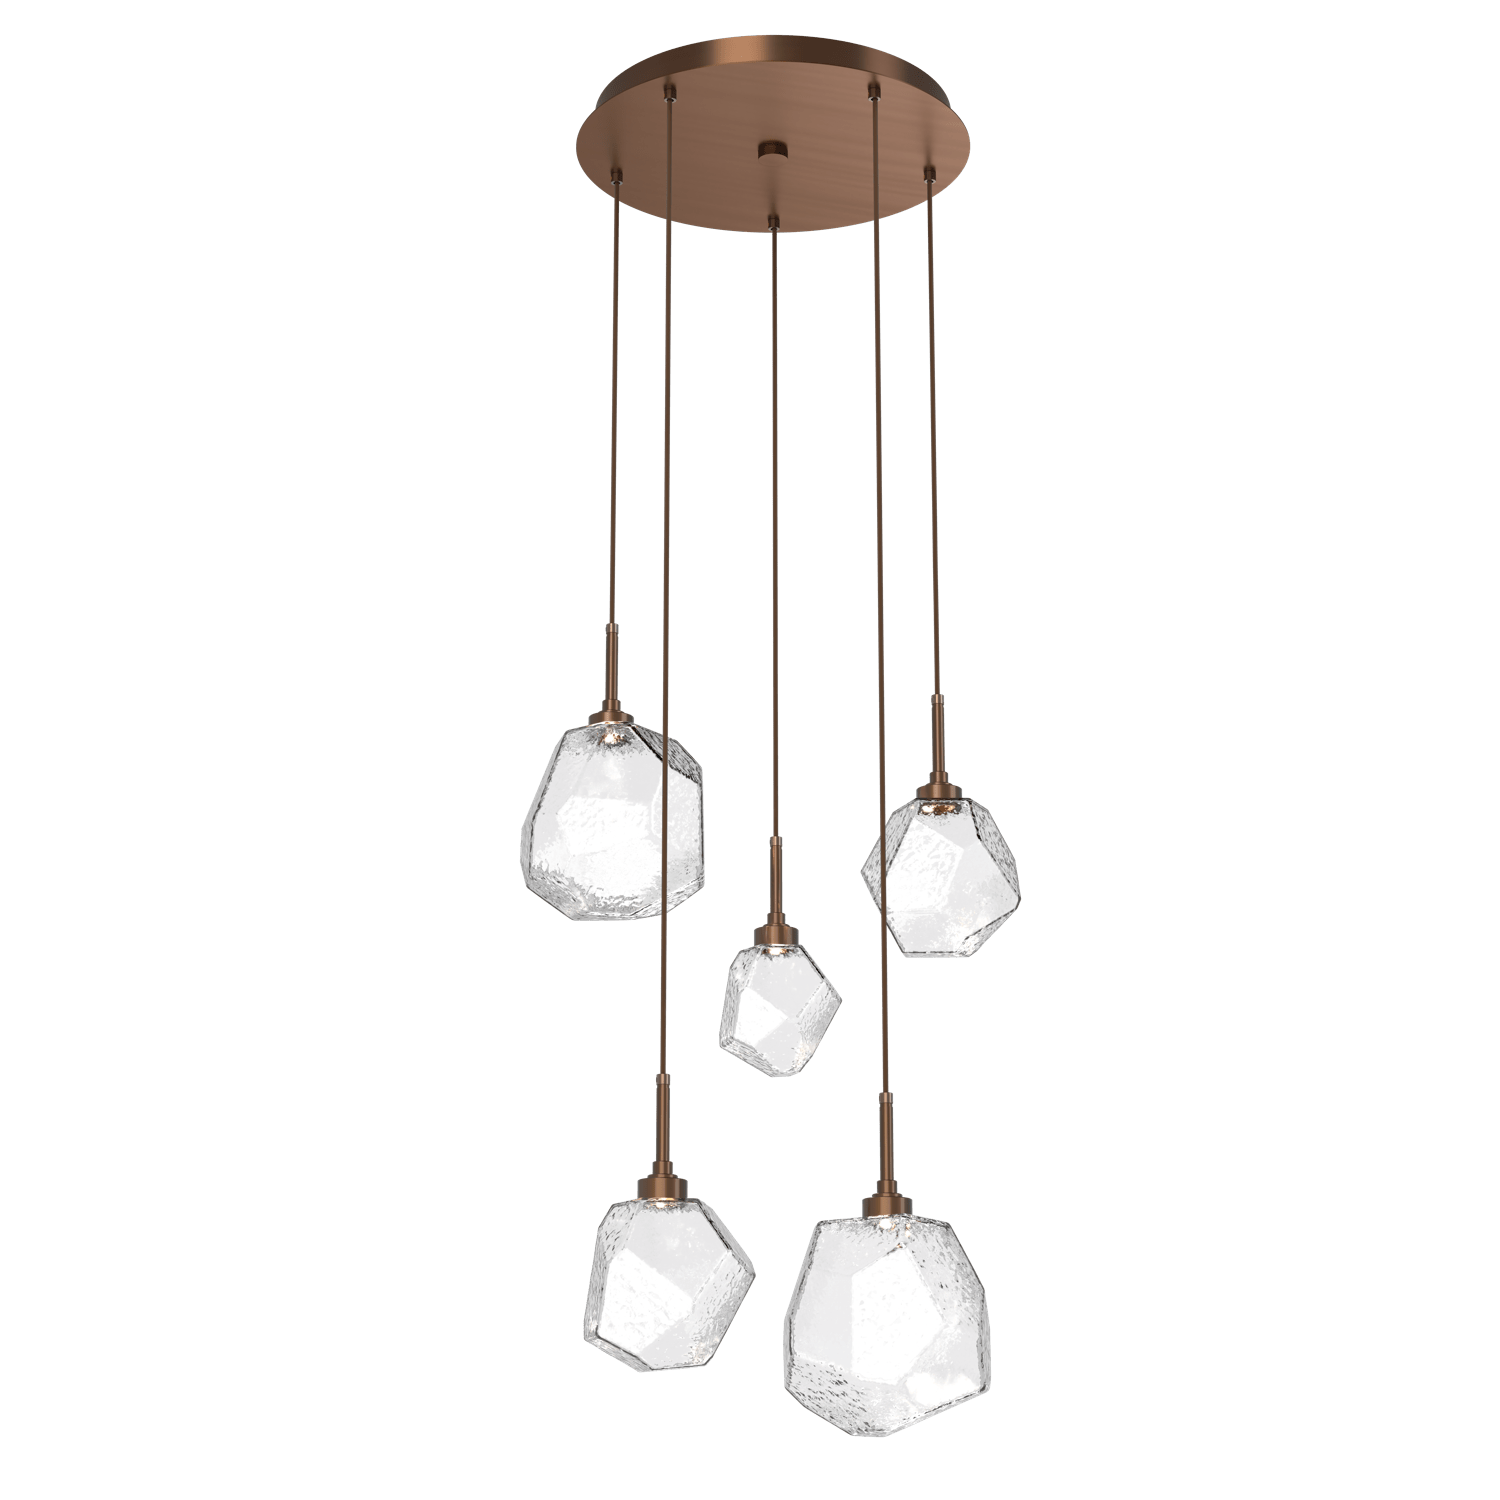 CHB0039-05-RB-C-Hammerton-Studio-Gem-5-light-round-pendant-chandelier-with-oil-rubbed-bronze-finish-and-clear-blown-glass-shades-and-LED-lamping